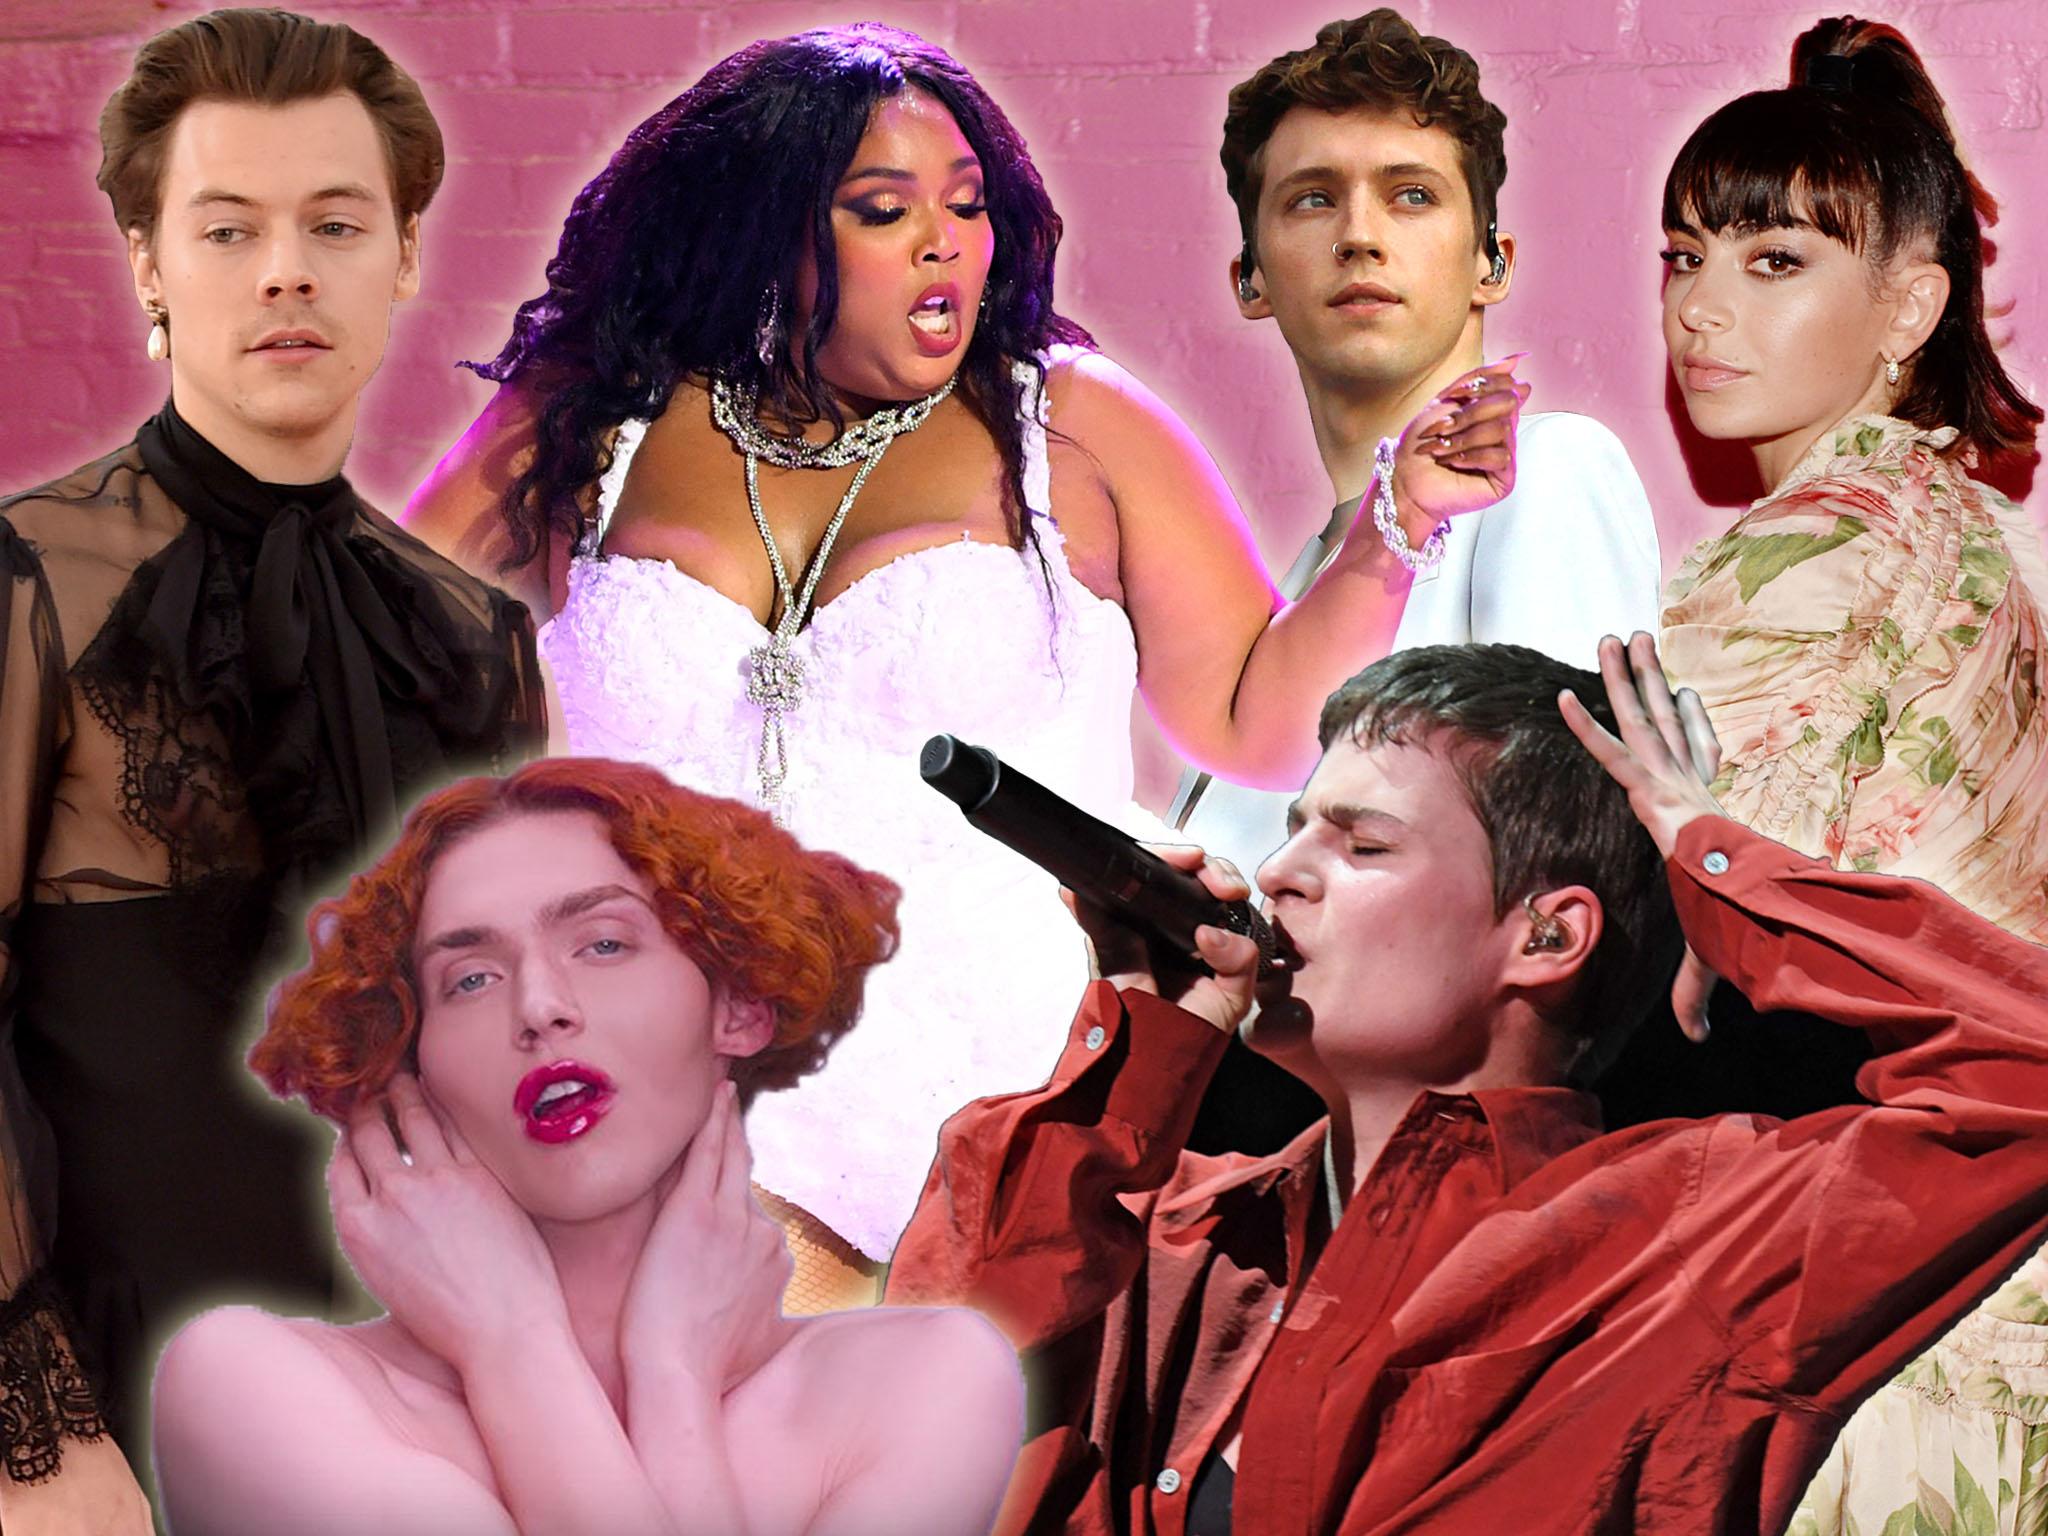 Let's talk about sex, baby: How pop music is changing the way we ...